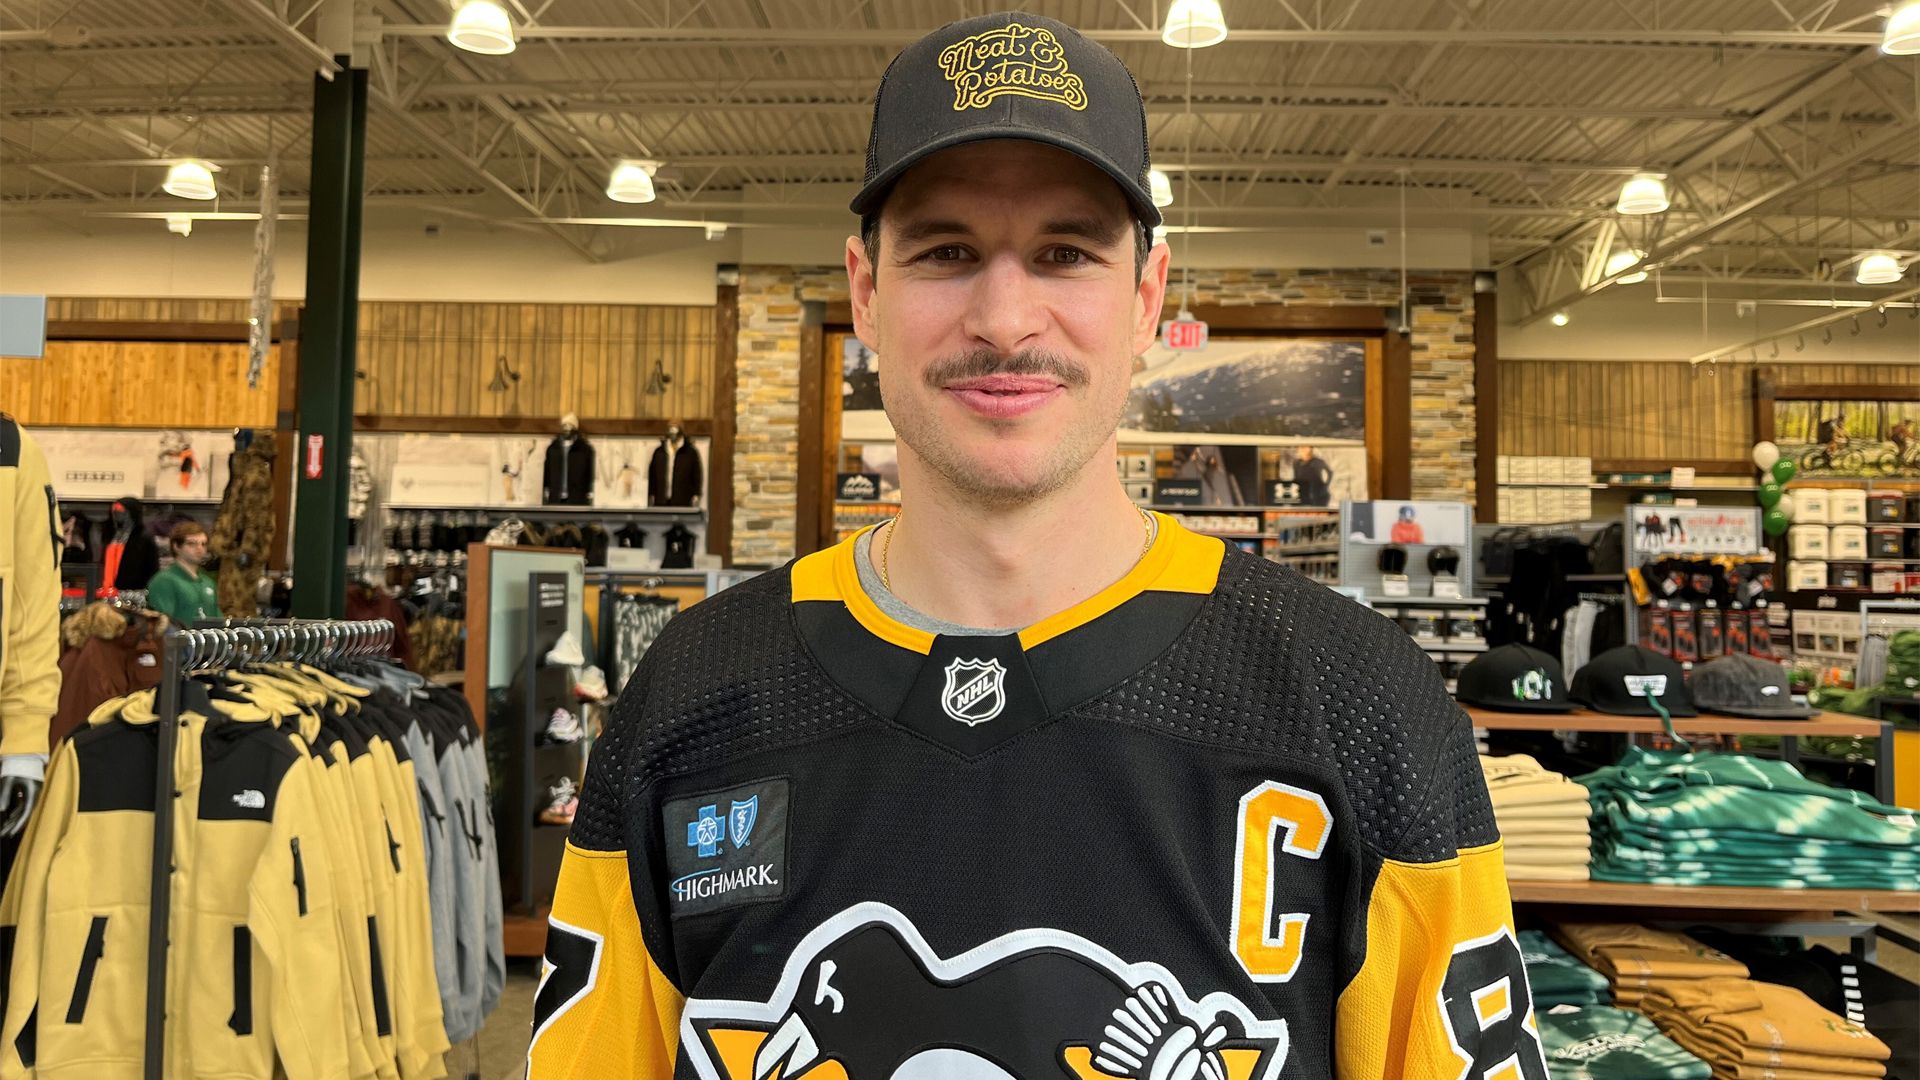 NHL Player Sidney Crosby smiles with a glorious Mo upon his upper lip